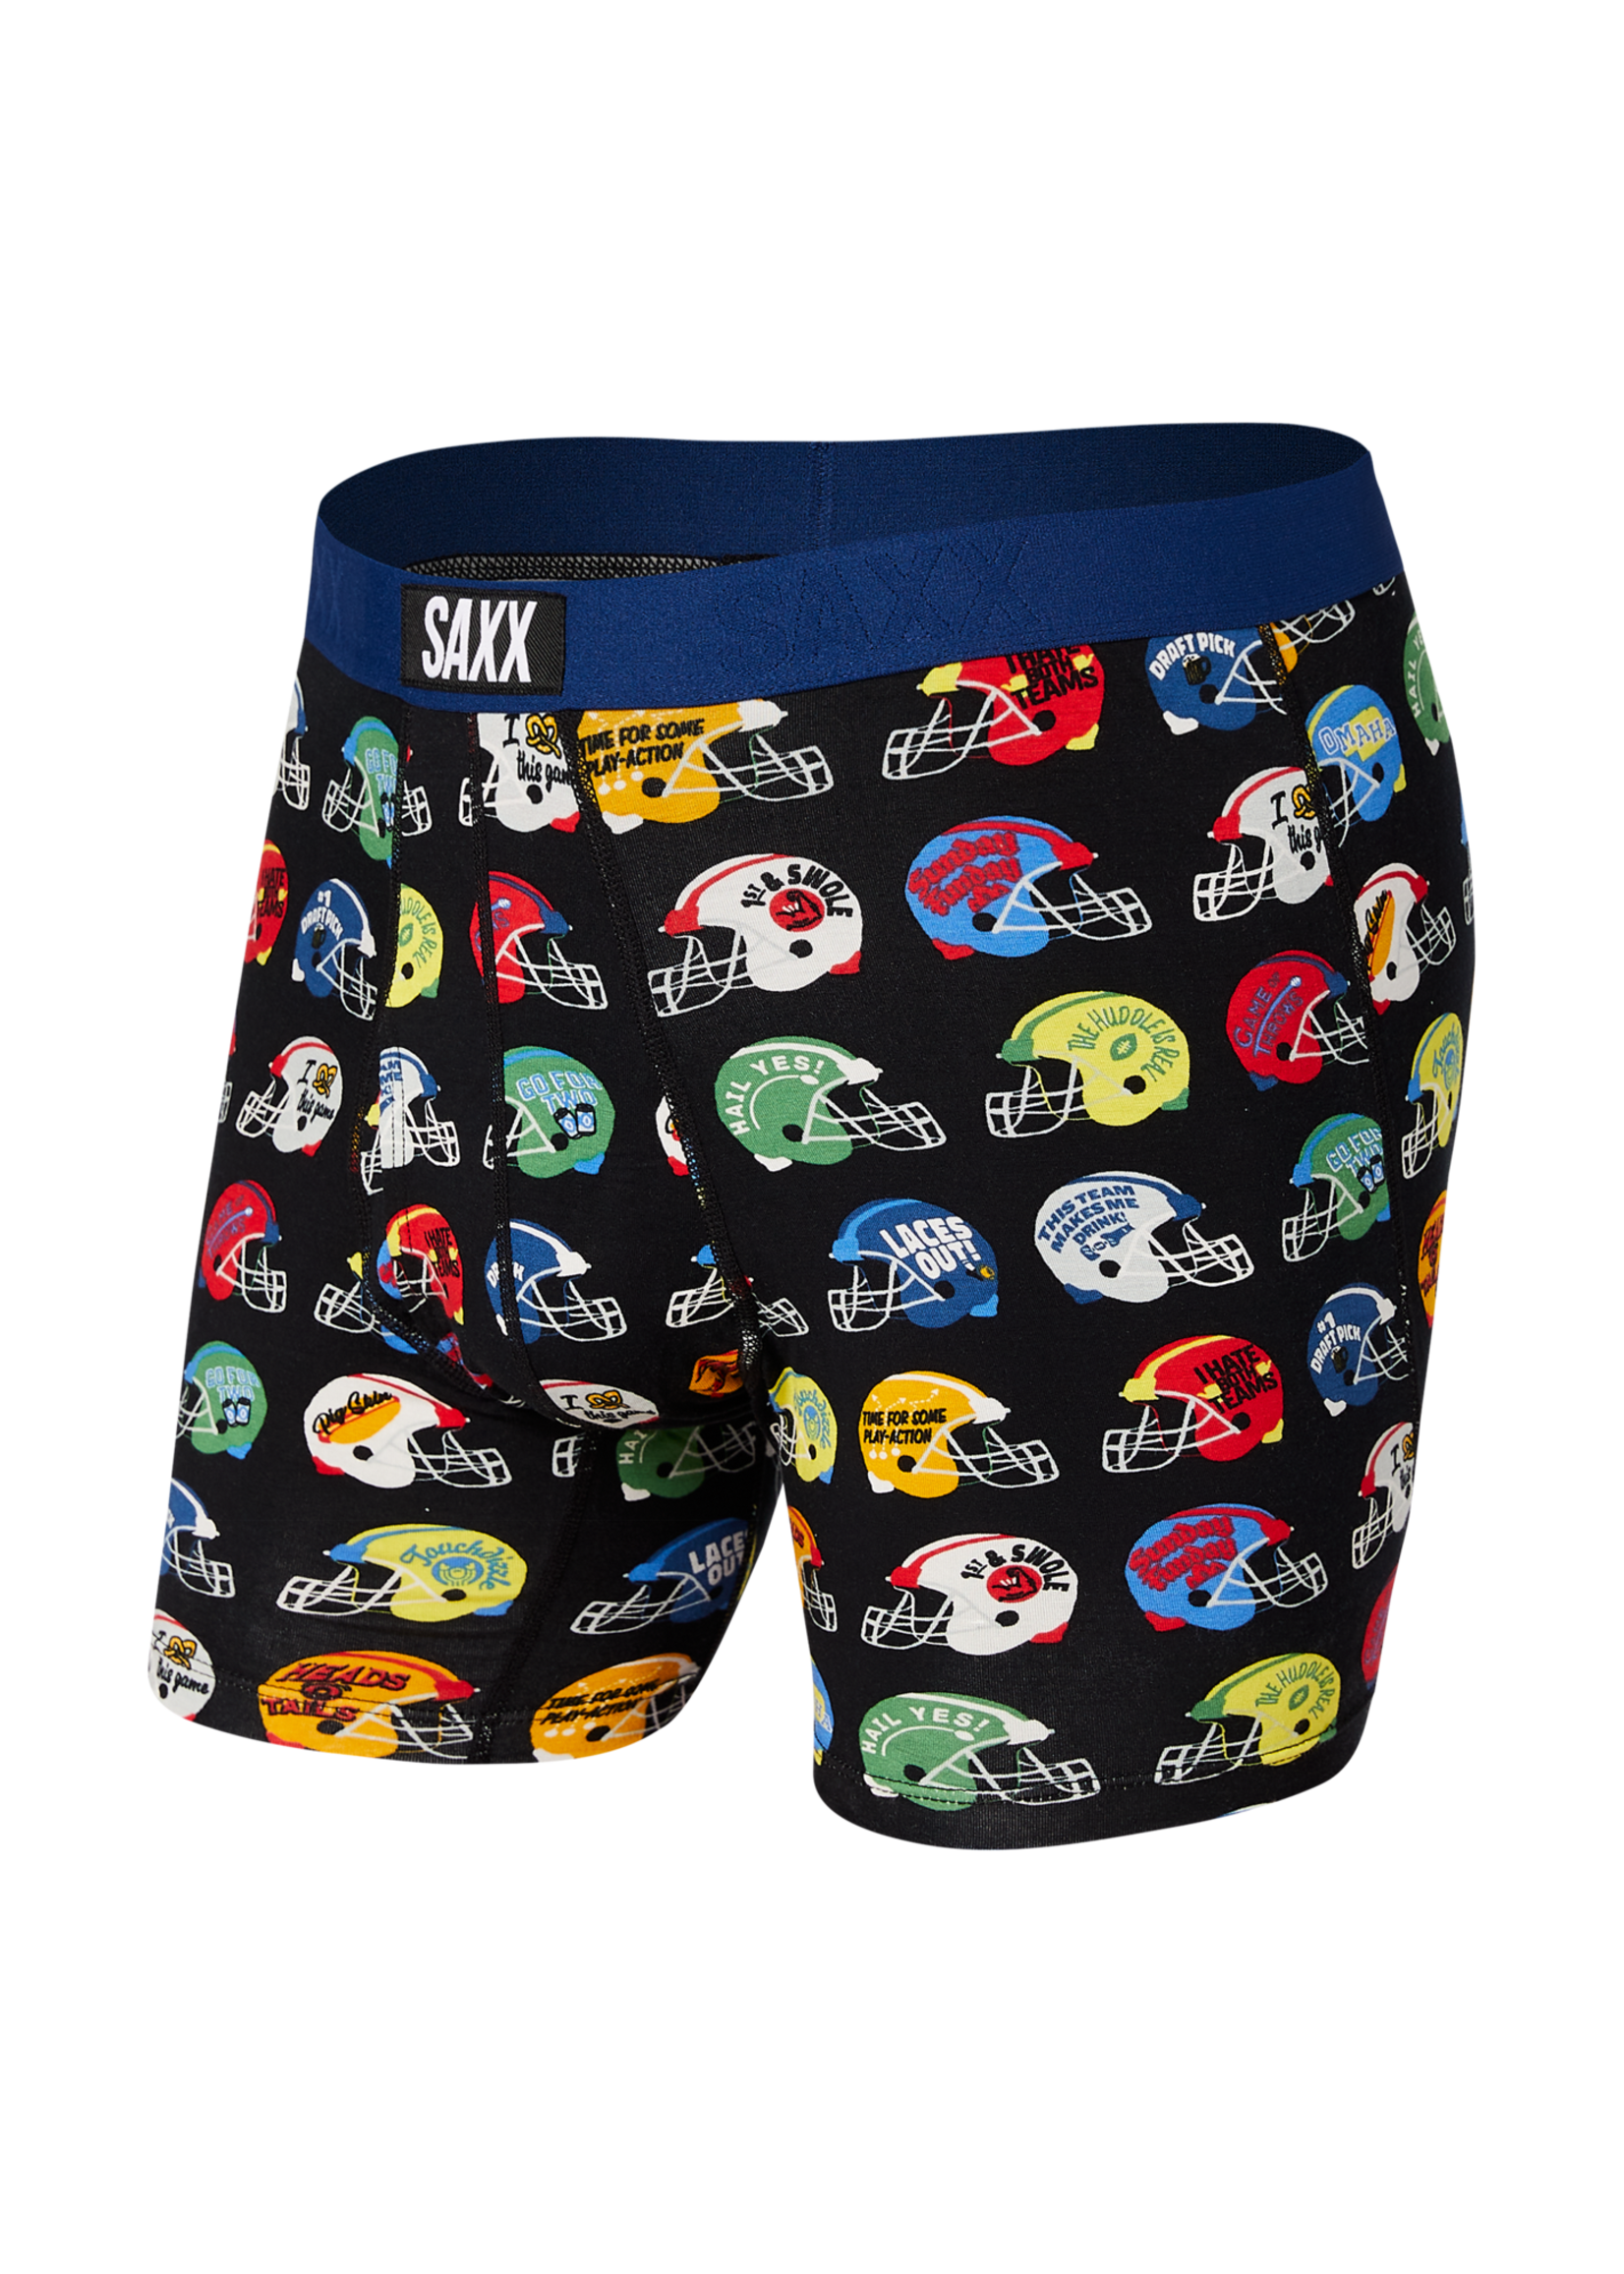 Saxx ULTRA BOXER BRIEF FLY - THE HUDDLE IS REAL